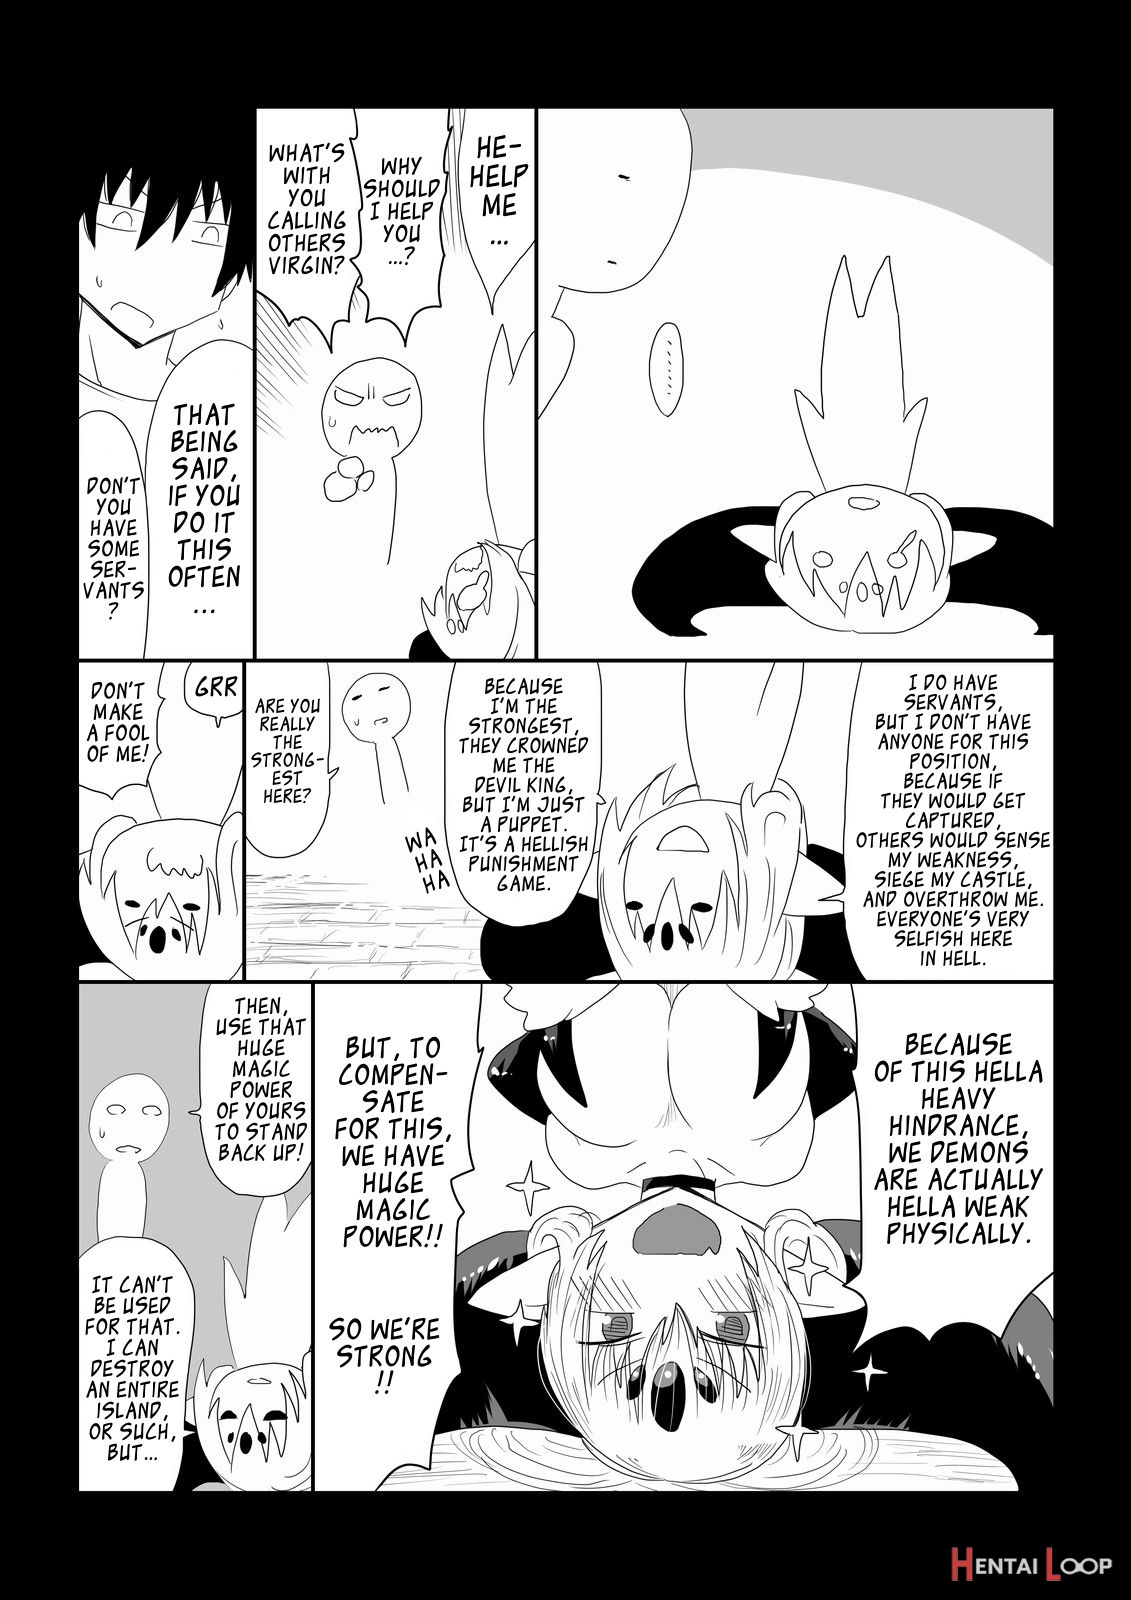 The Devil King's Headis Too Heavy page 4